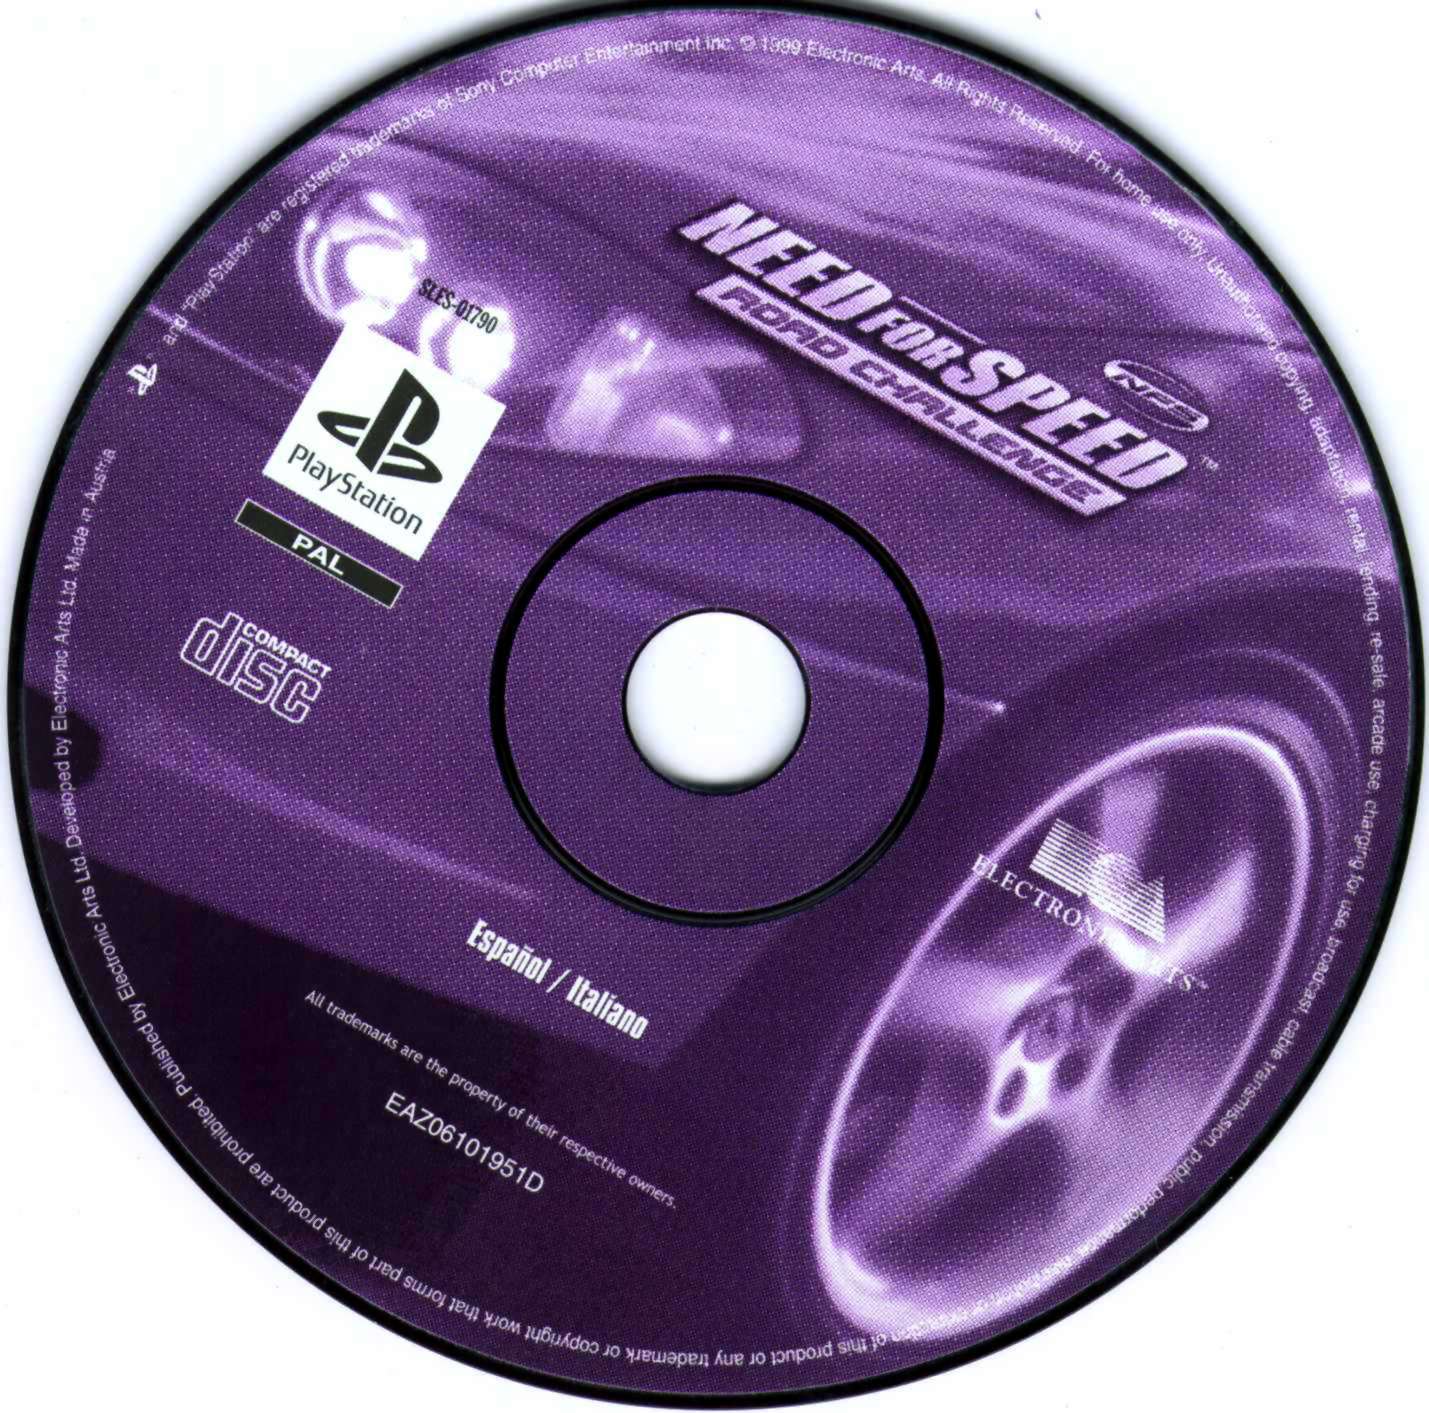 Need For Speed High Stakes-PC CD ROM-Complete- RESURFACED DISC